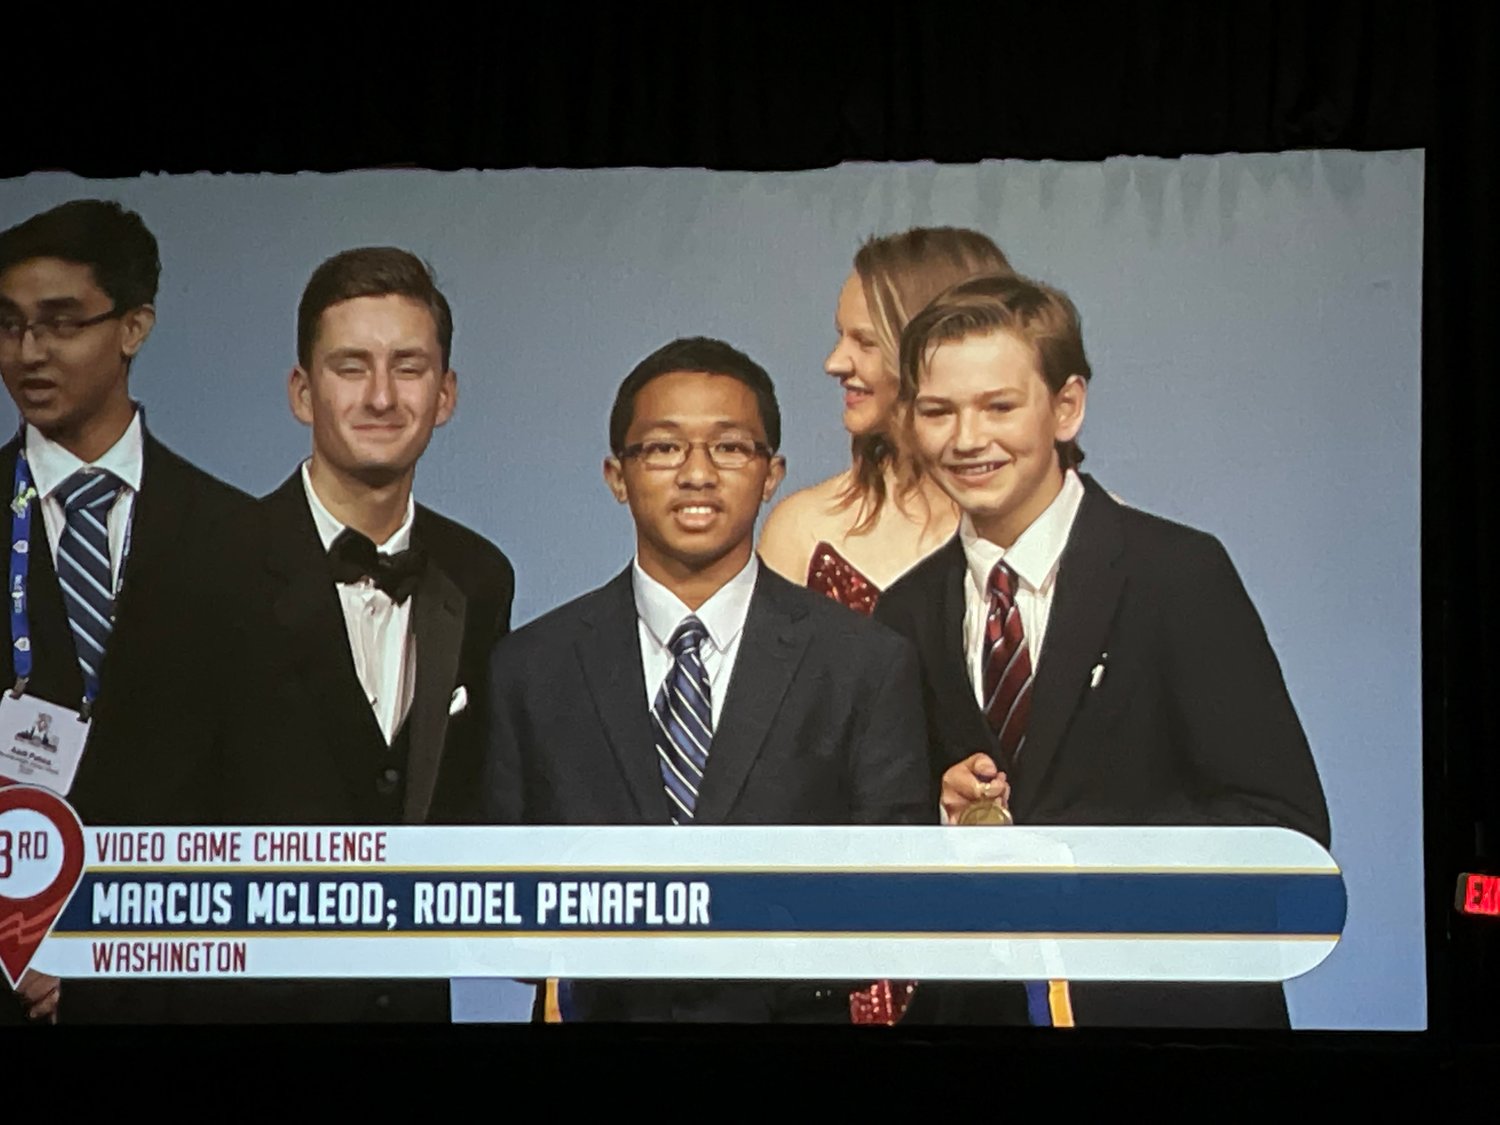 Komachin's Video Game Challenge contestants Marcus McLeod and Rodel Penaflor are shown on the projection screen at  the McCormick Place Convention Center in Chicago at the FBLA conference